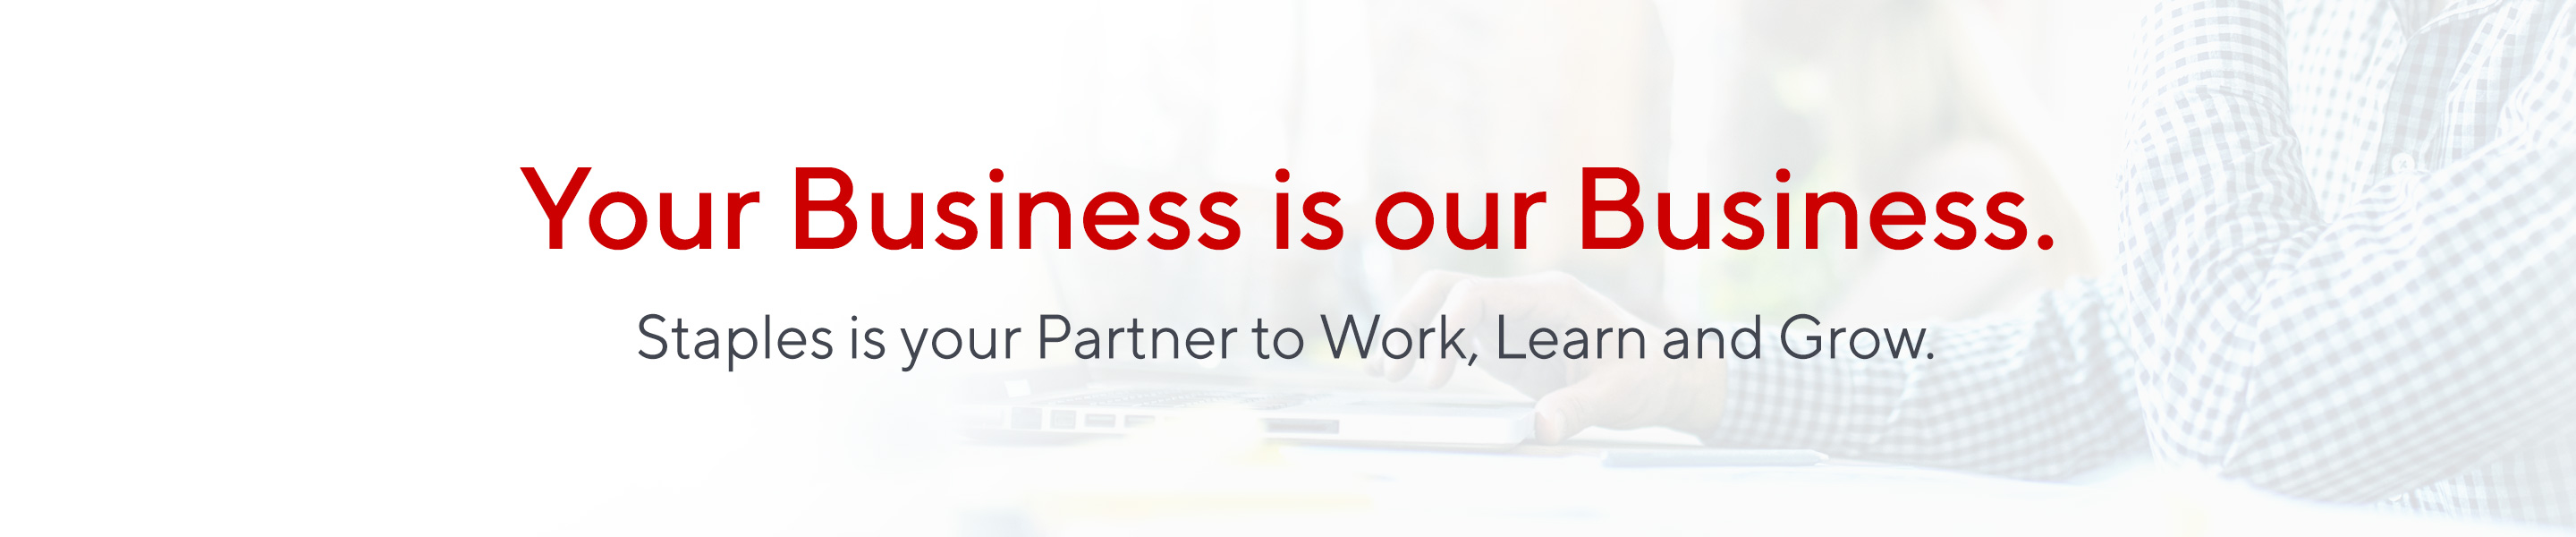 Your Business is our Business.  Staples is your Partner to Work, Learn and Grow.